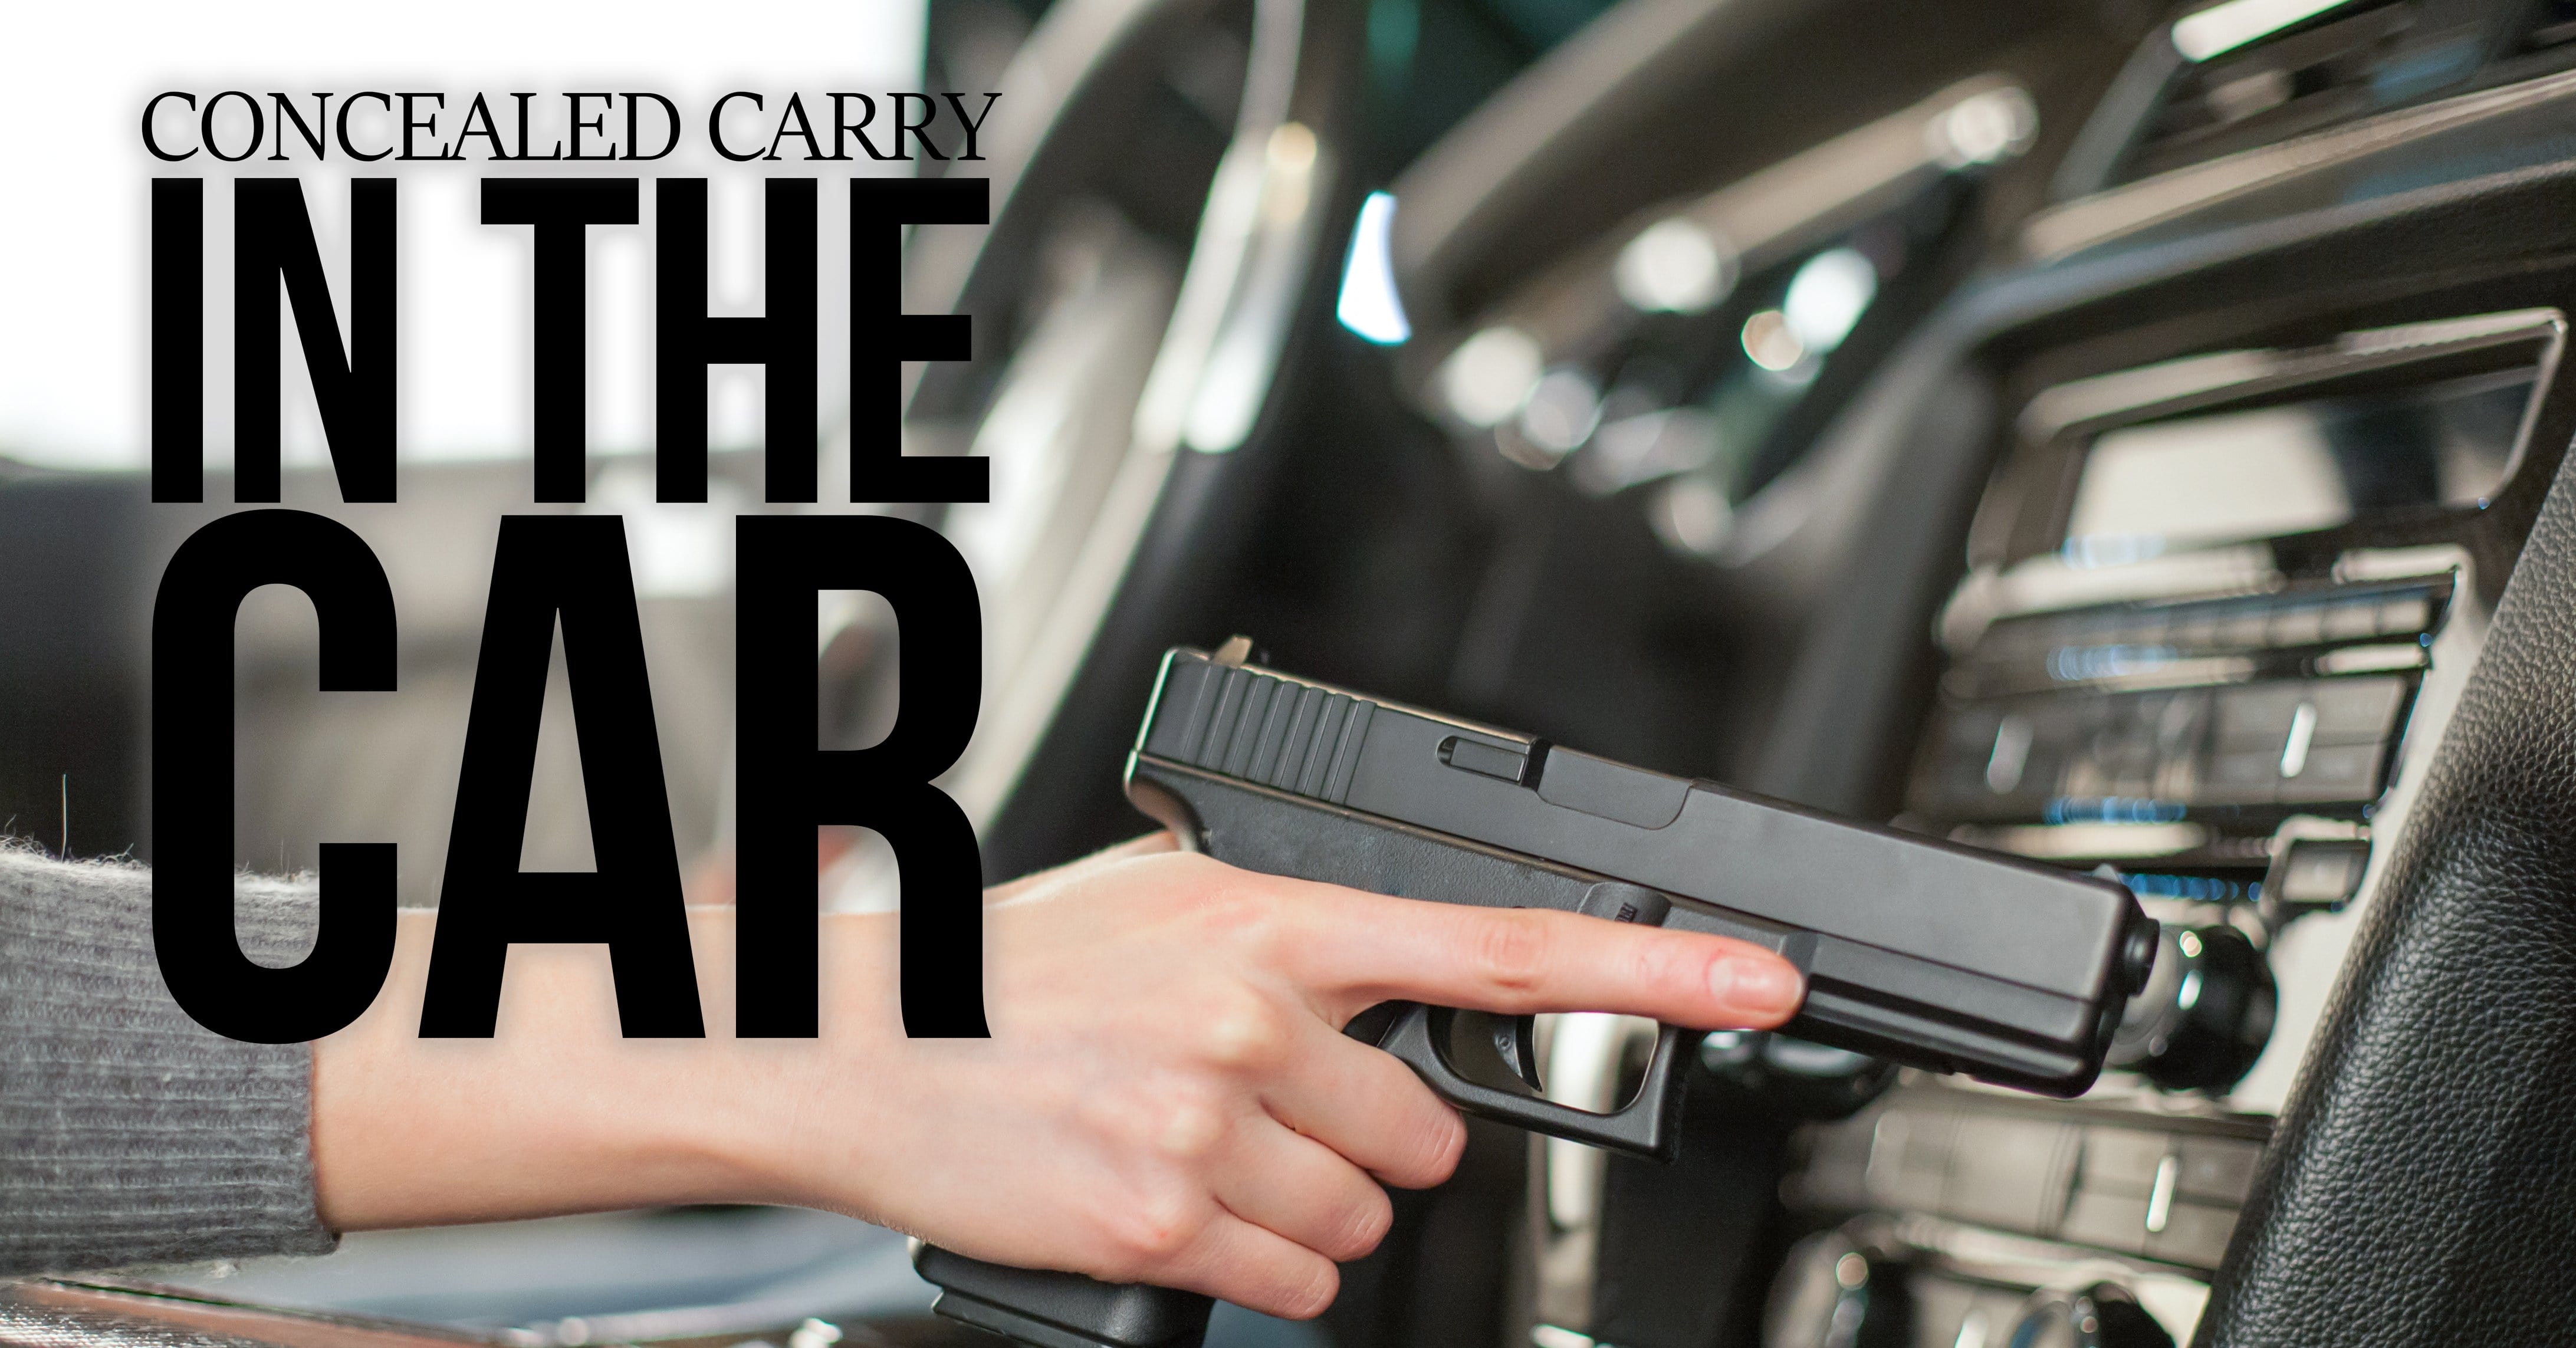 Concealed Carrying in the Car